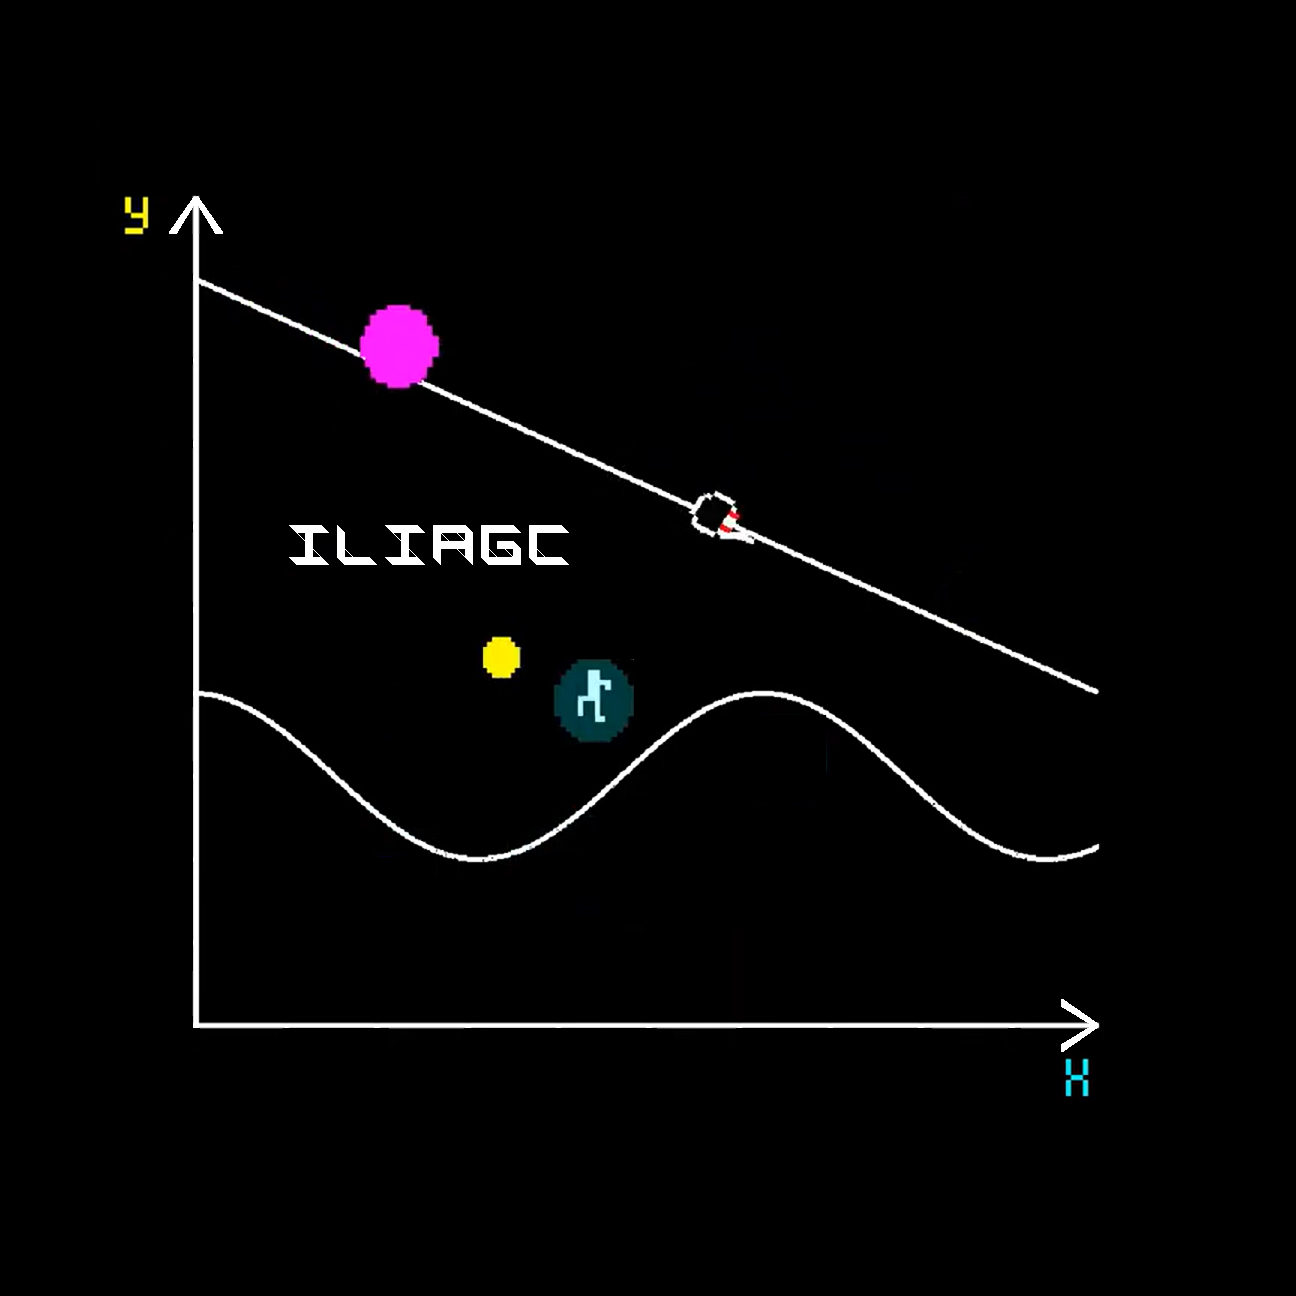 - A promotional image for ILIAGC: I Live In A Graphing Calculator